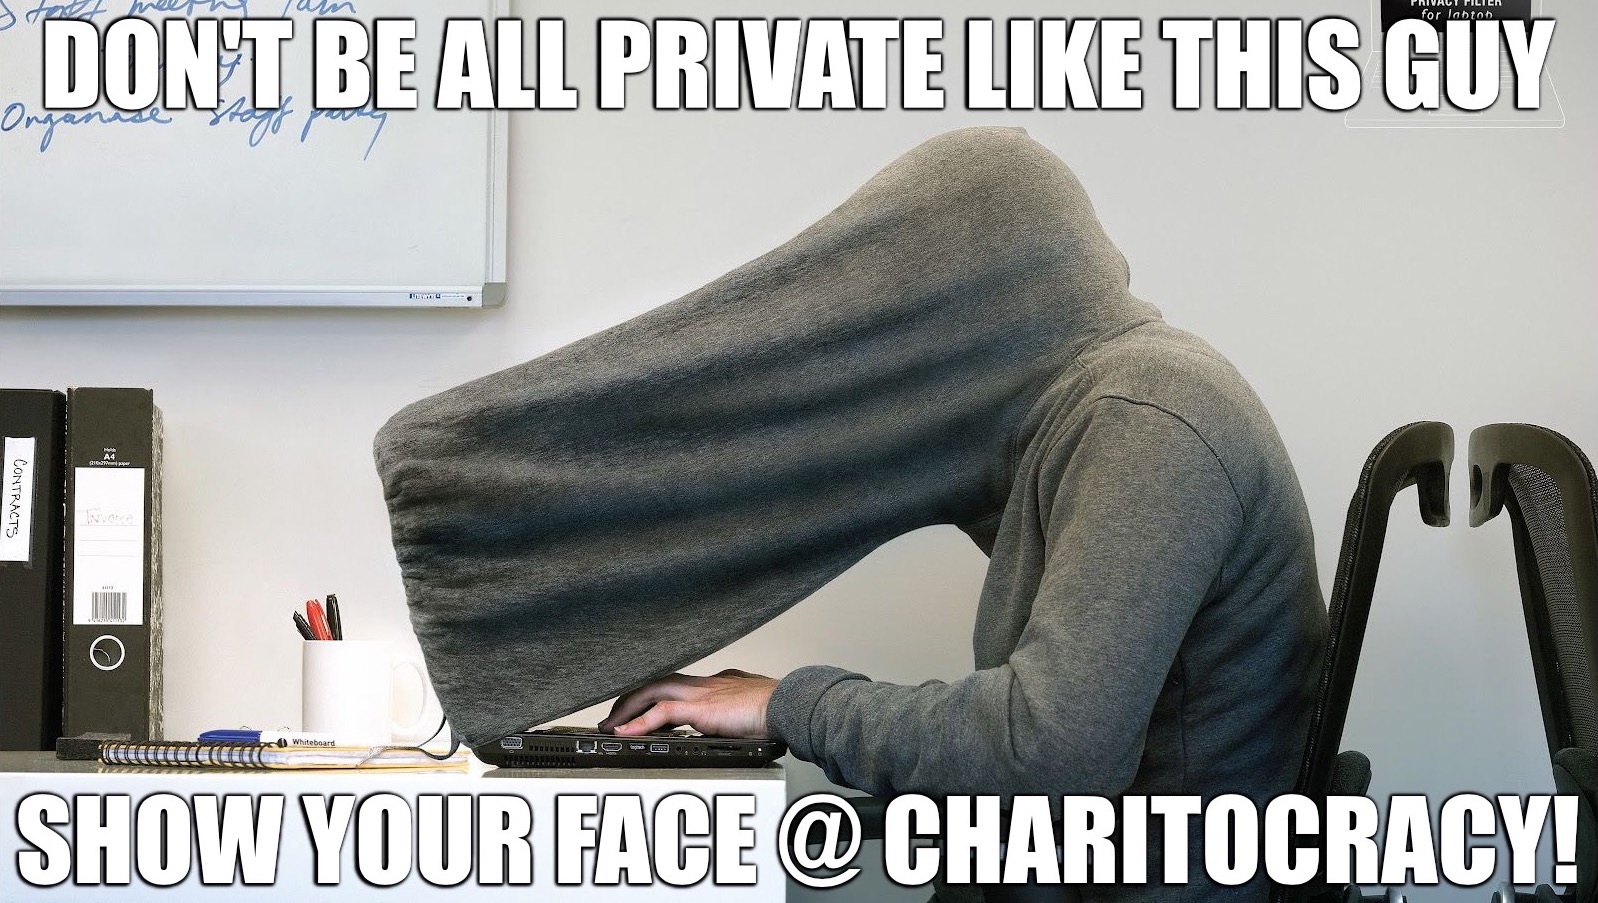 Don't be all private like this guy. Show your face @ Charitocracy!